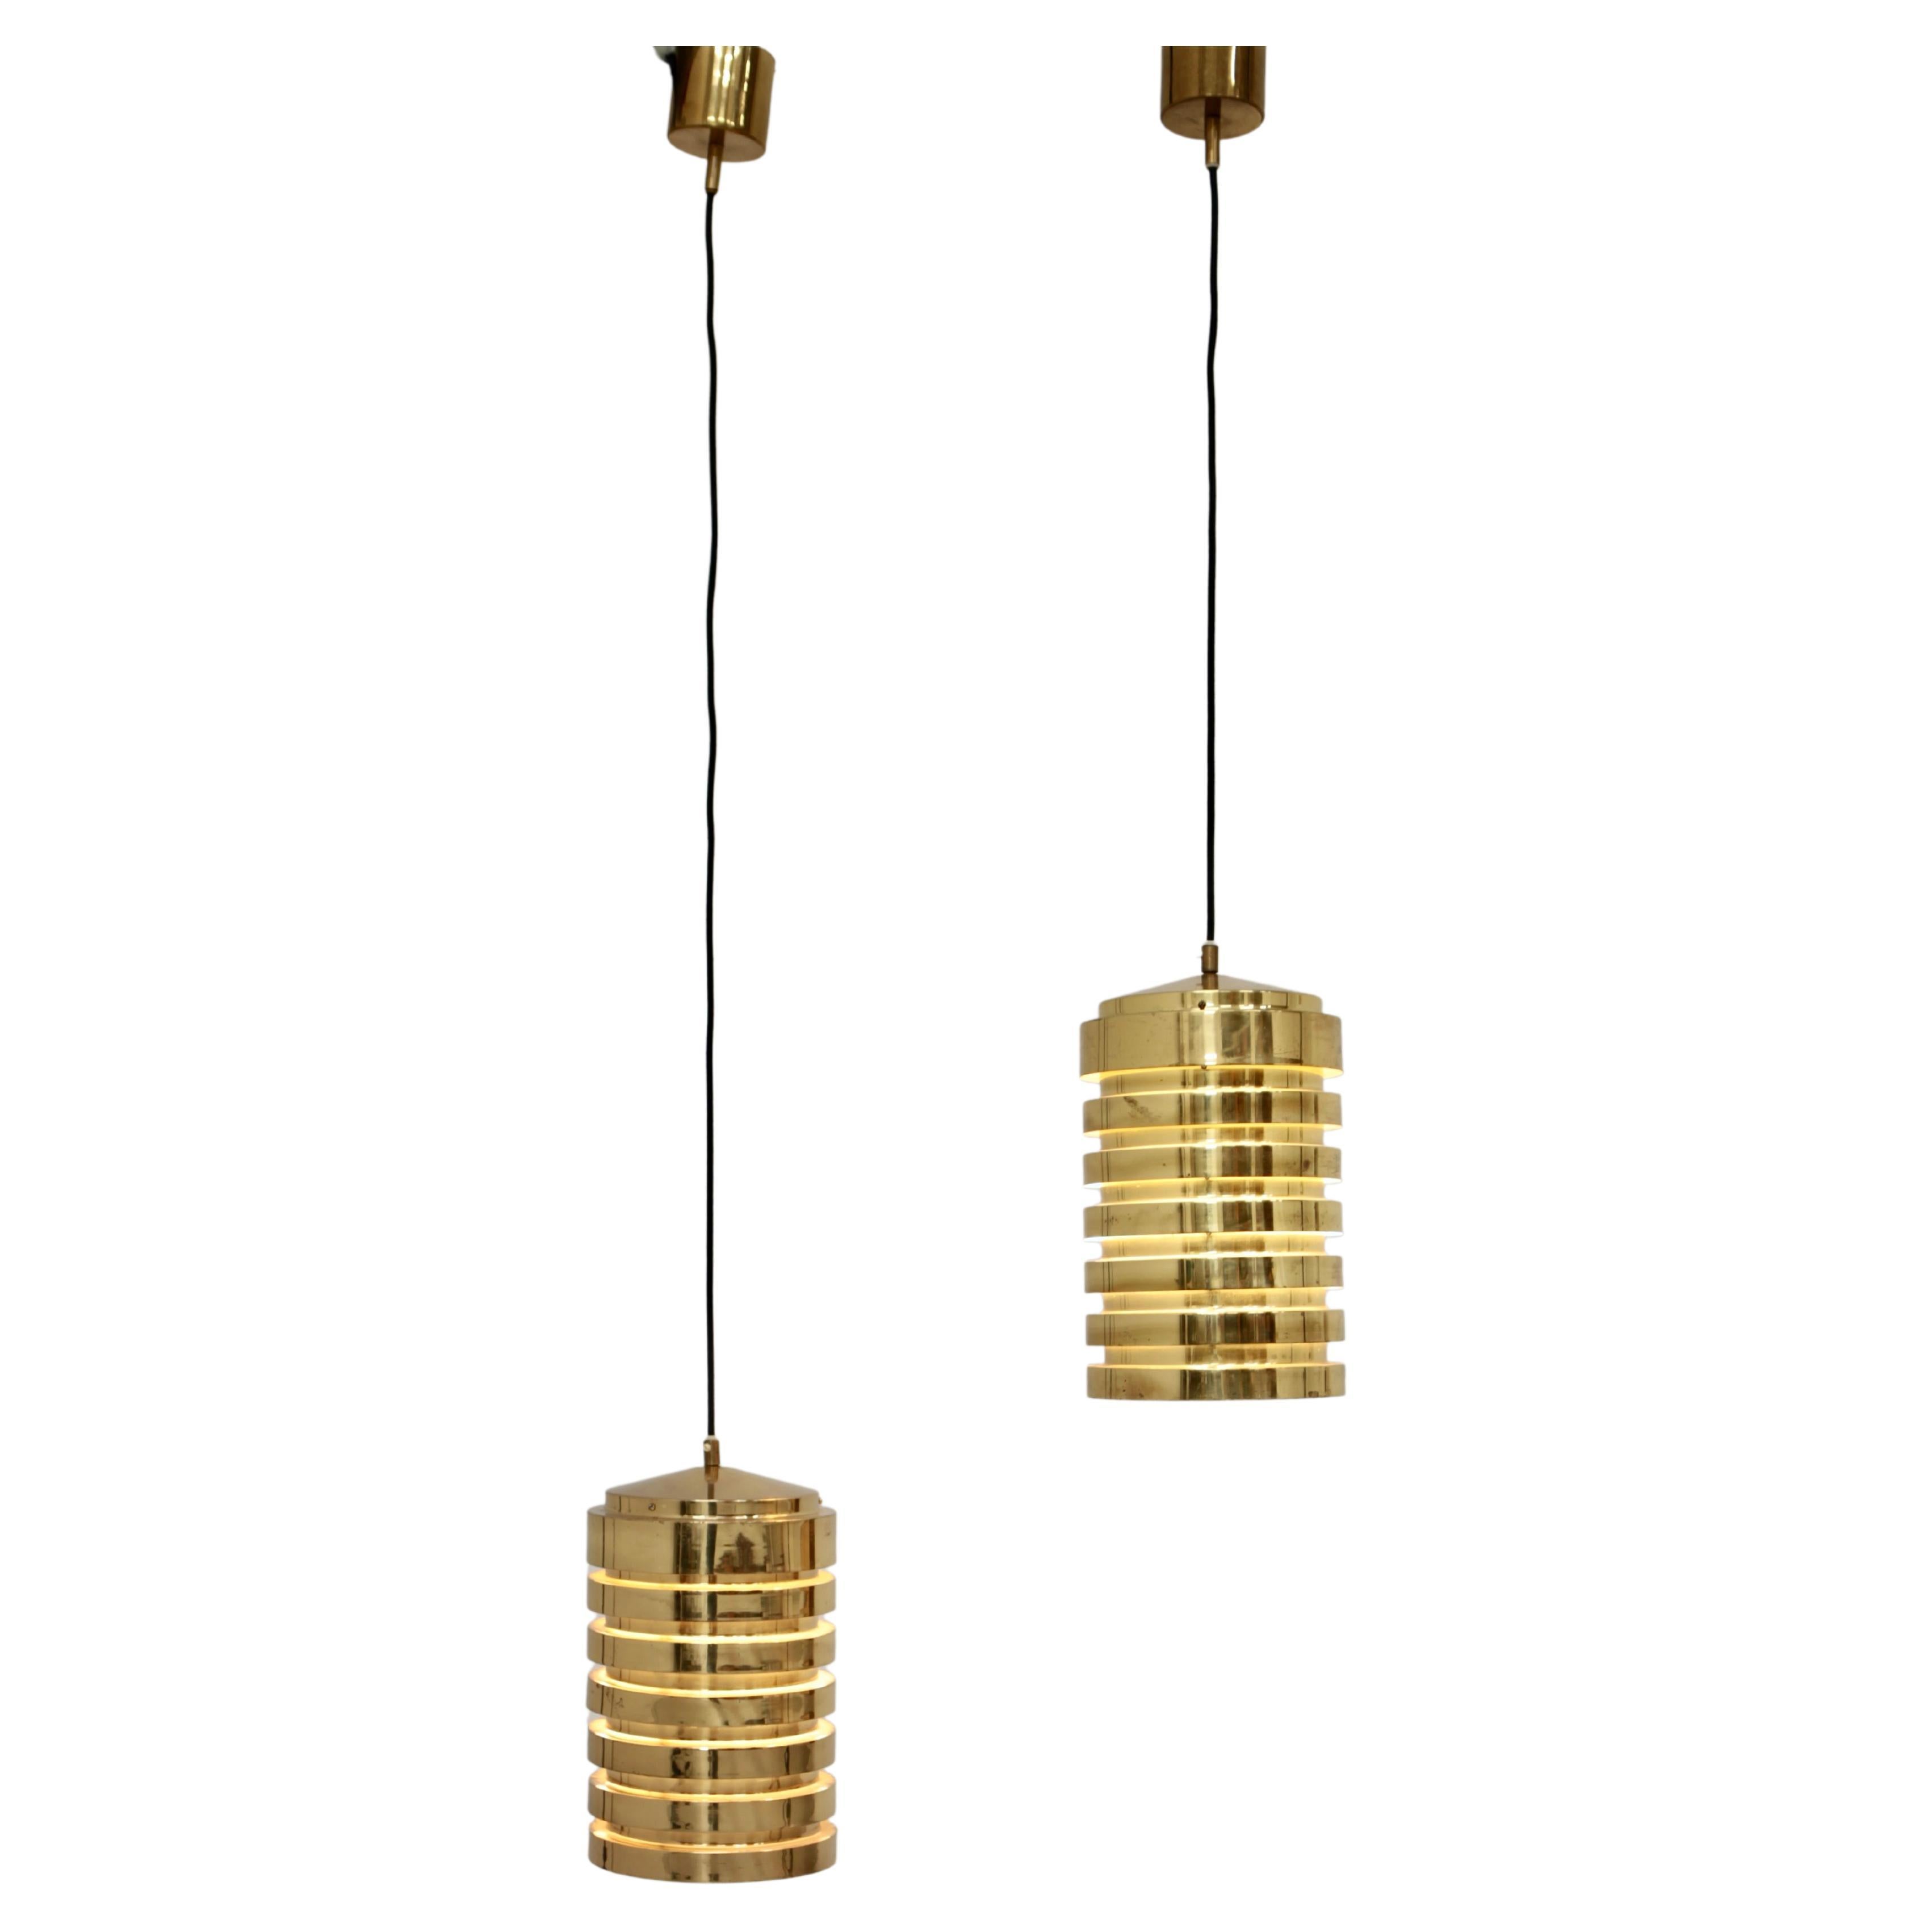 Hans-Agne Jakobsson, Pair of T487 Pendants in Polished Brass, Markaryd, 1960s For Sale